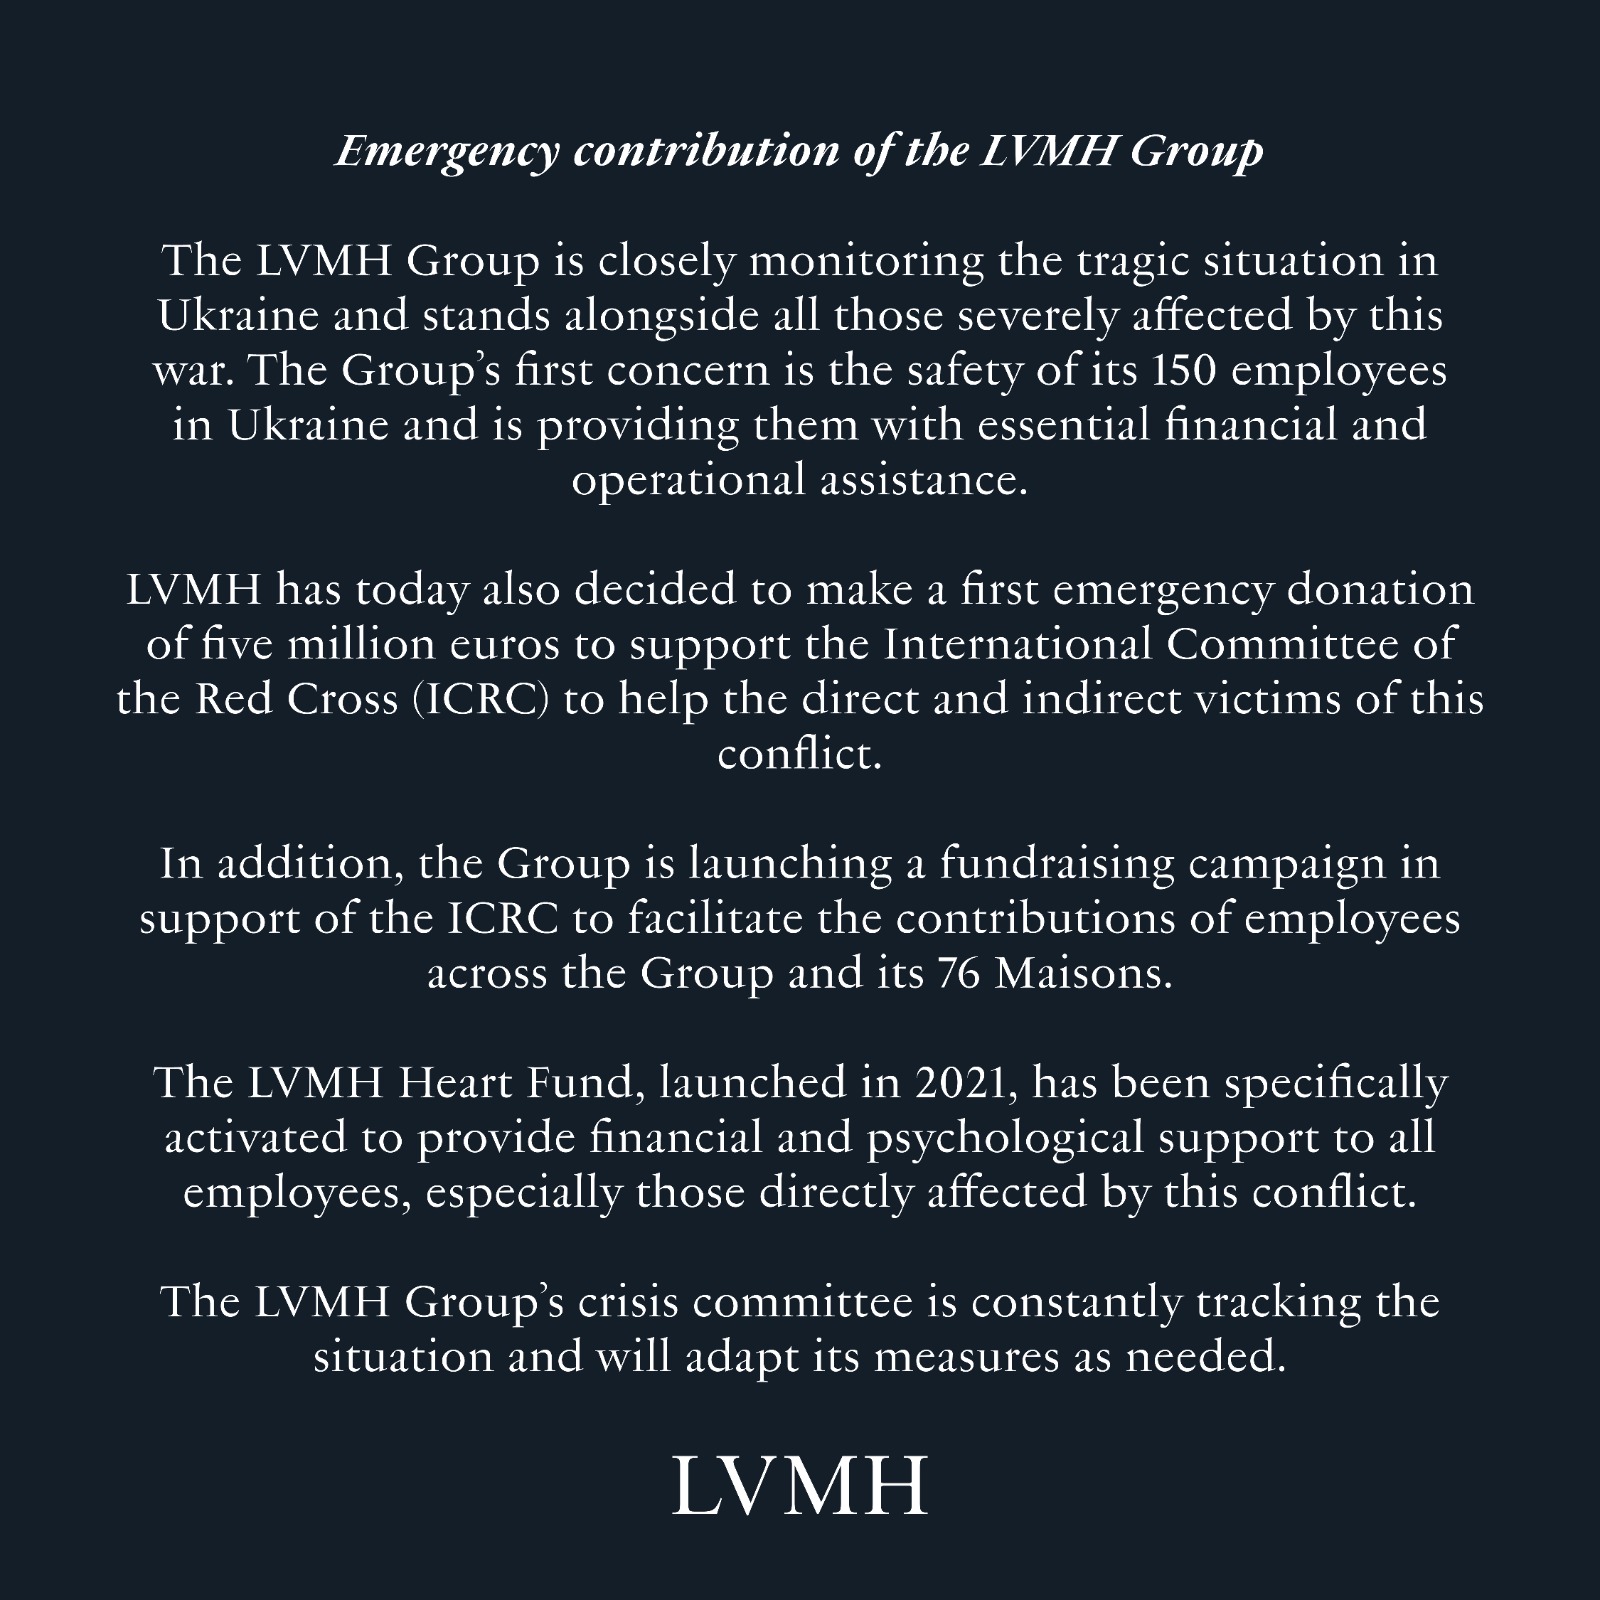 LVMH on X: The LVMH Group stands alongside all those severely